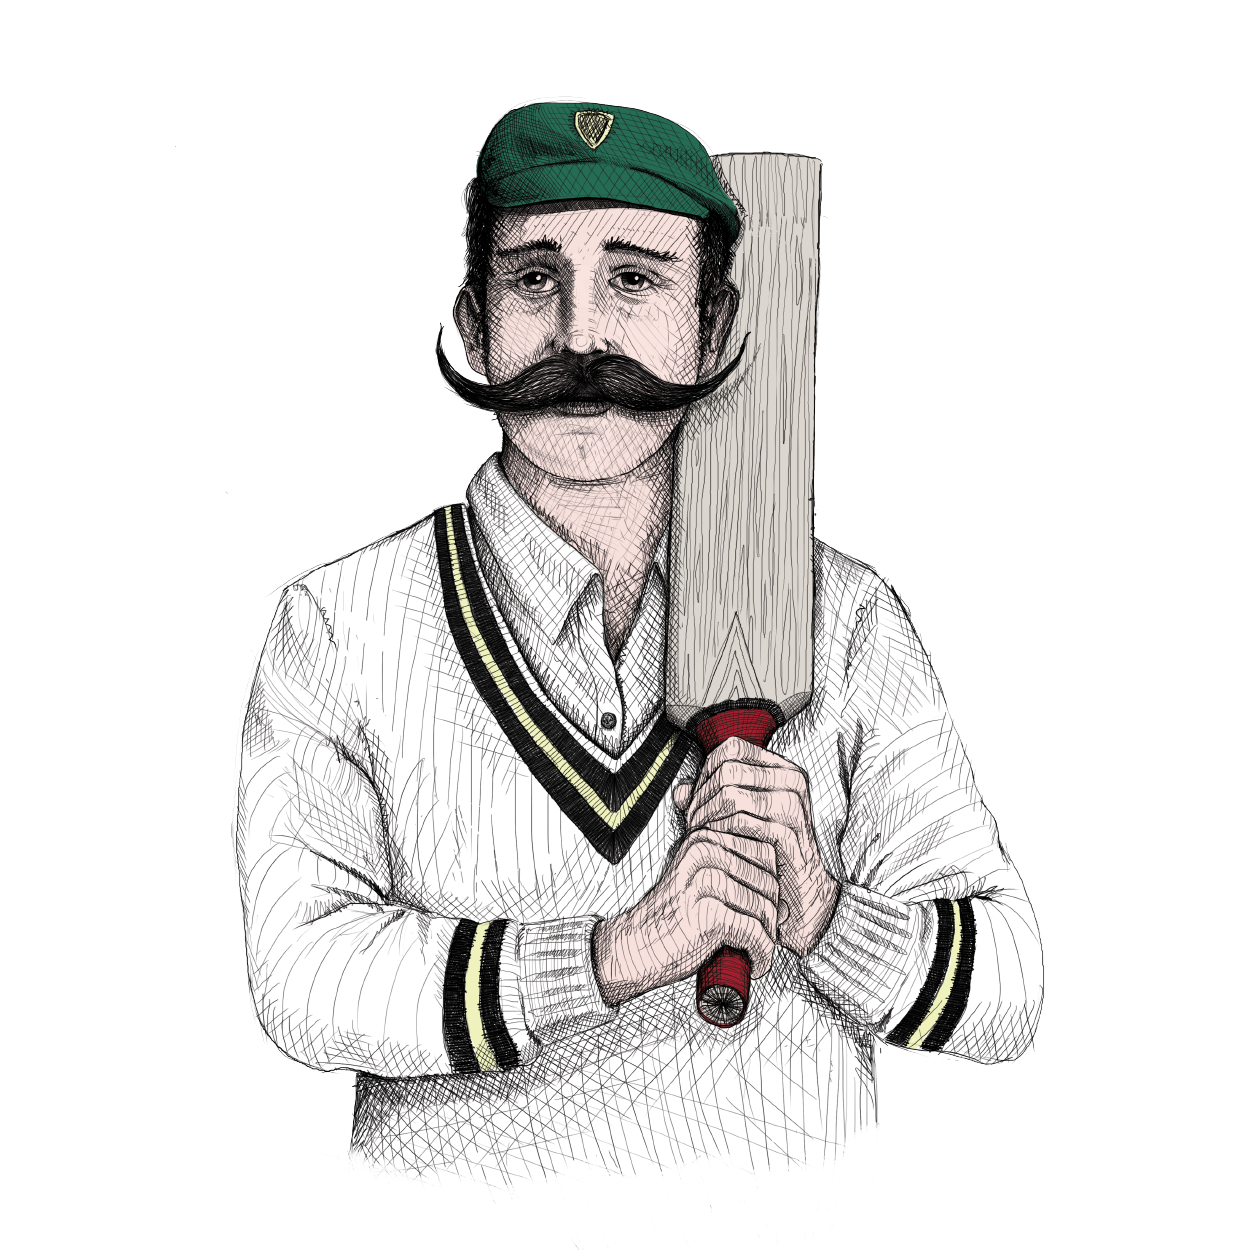 cricketer with green cap holding a cricket bat